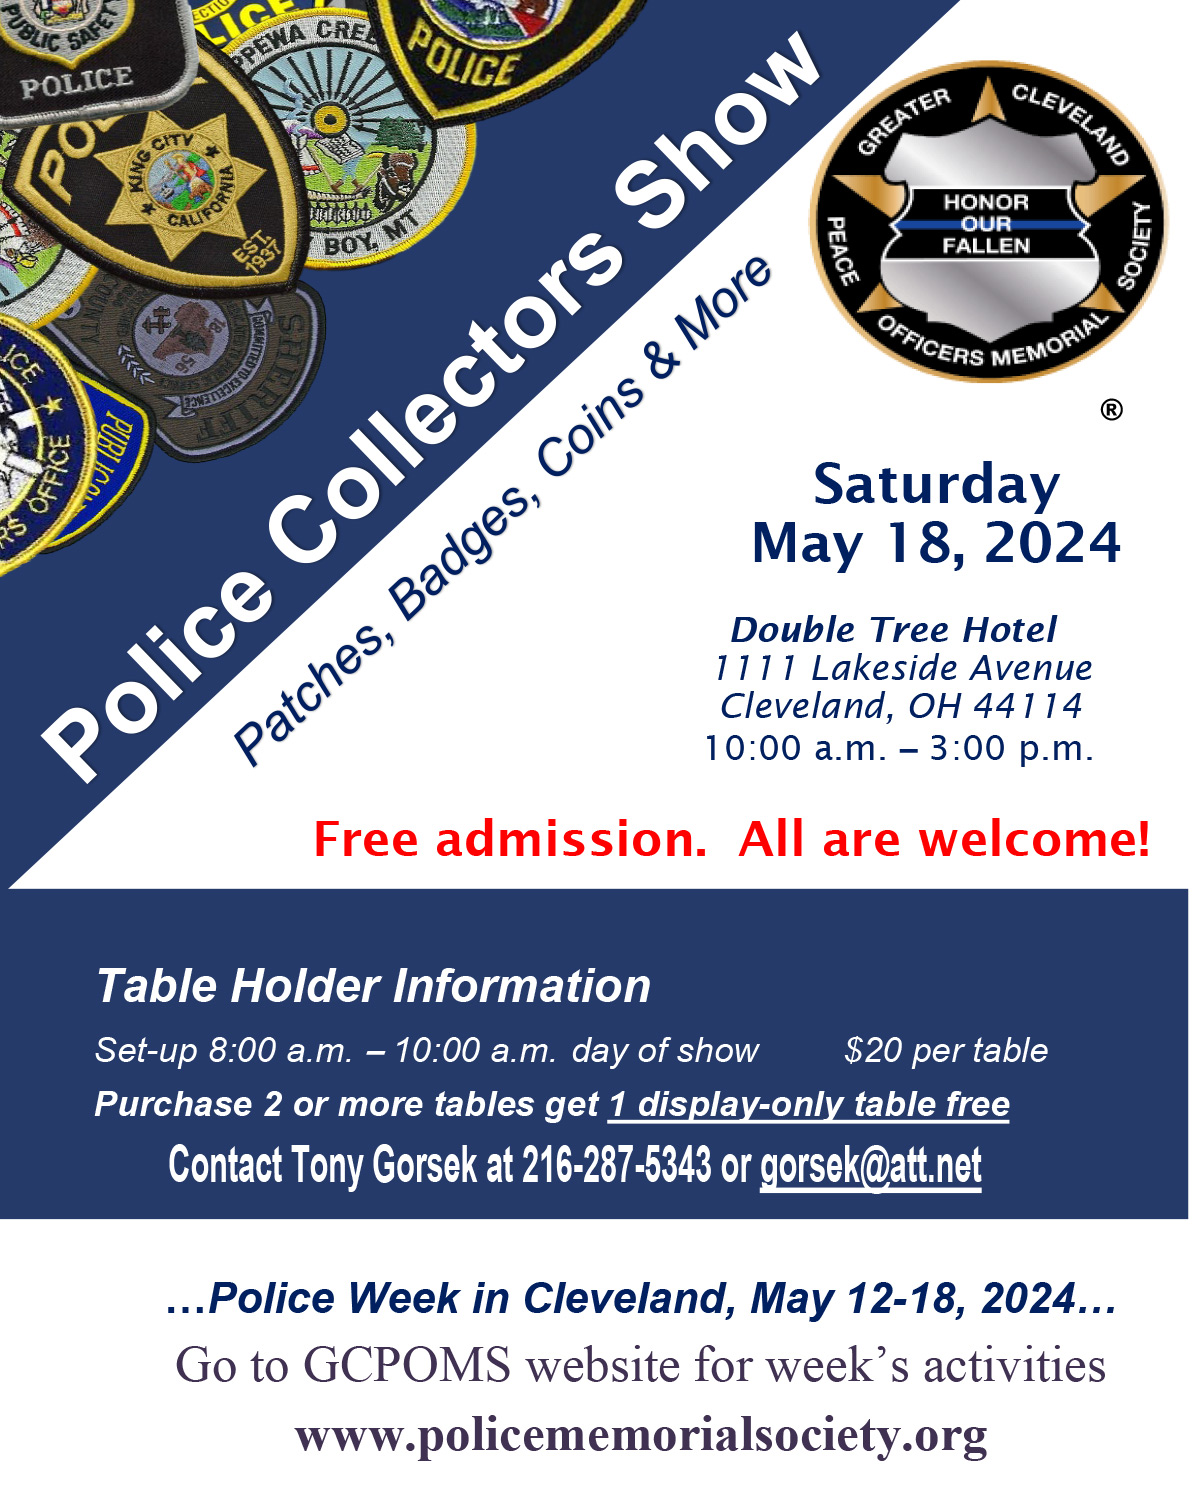 MAJOR DISPLAY: Columbus Police show off patch collections, challenge coins